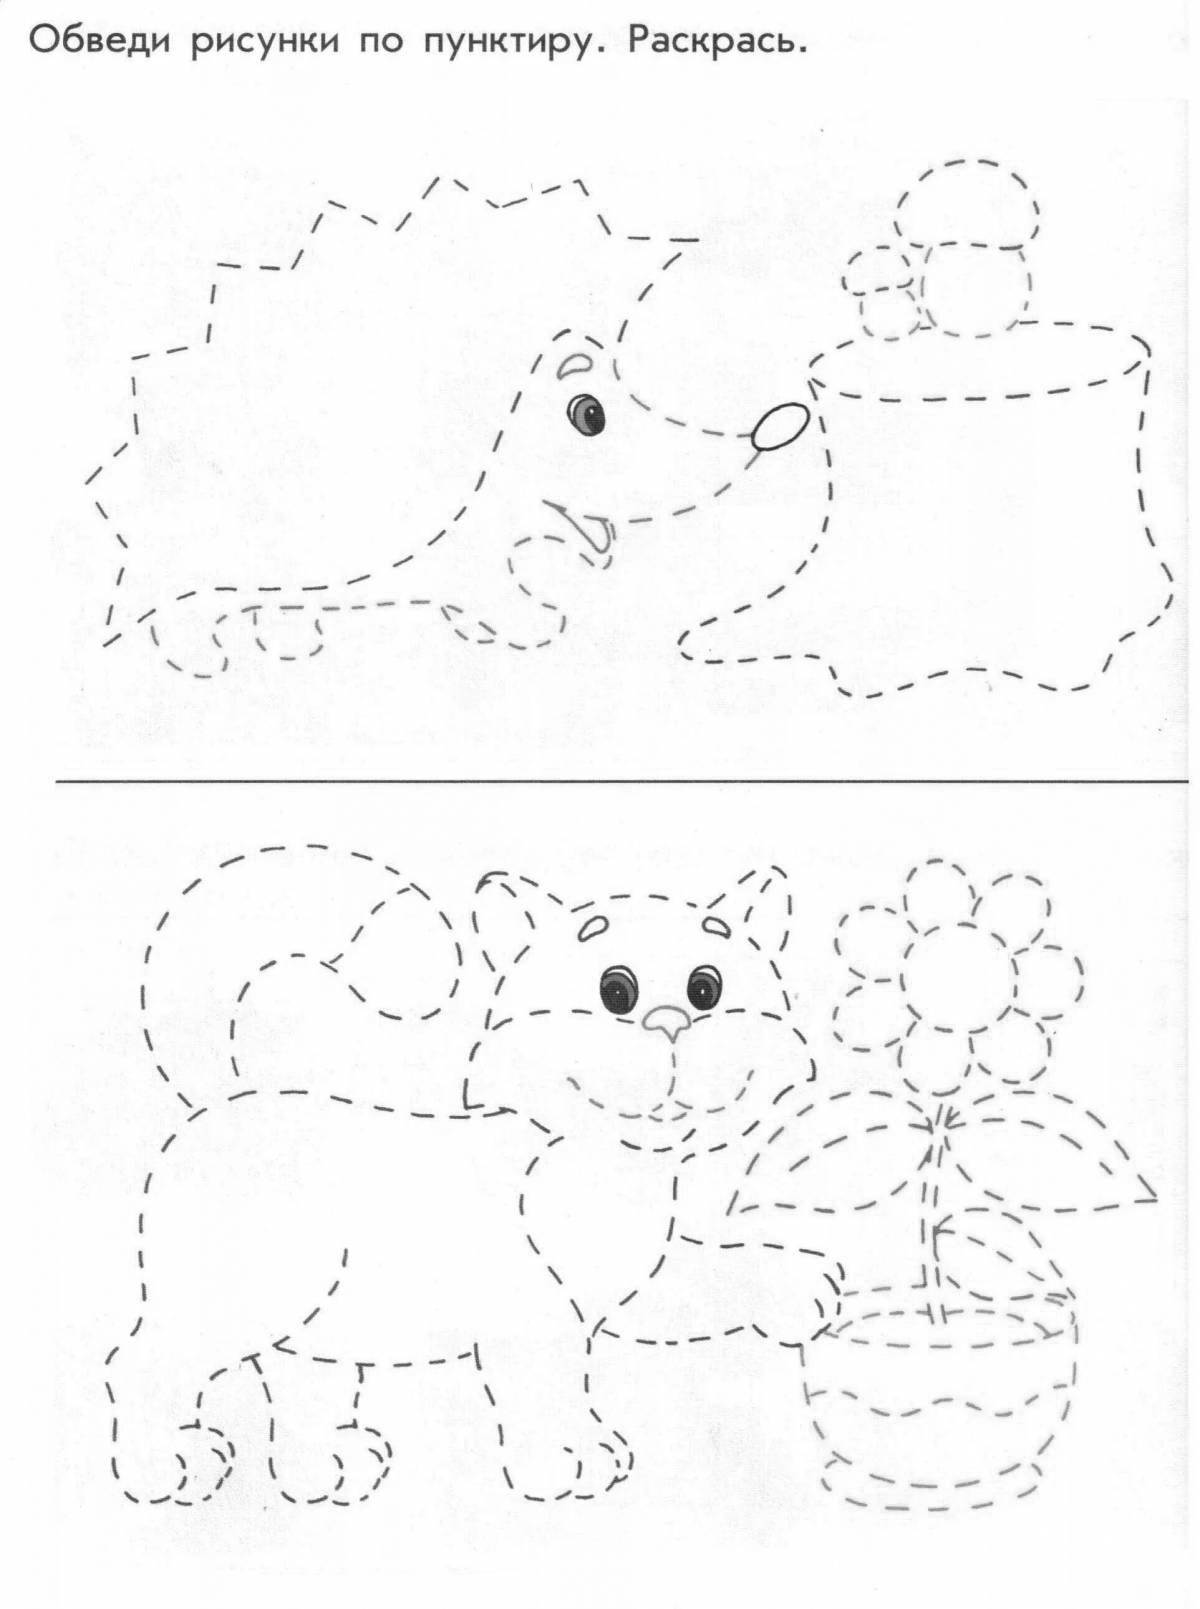 Coloring colorful dotted lines for kids